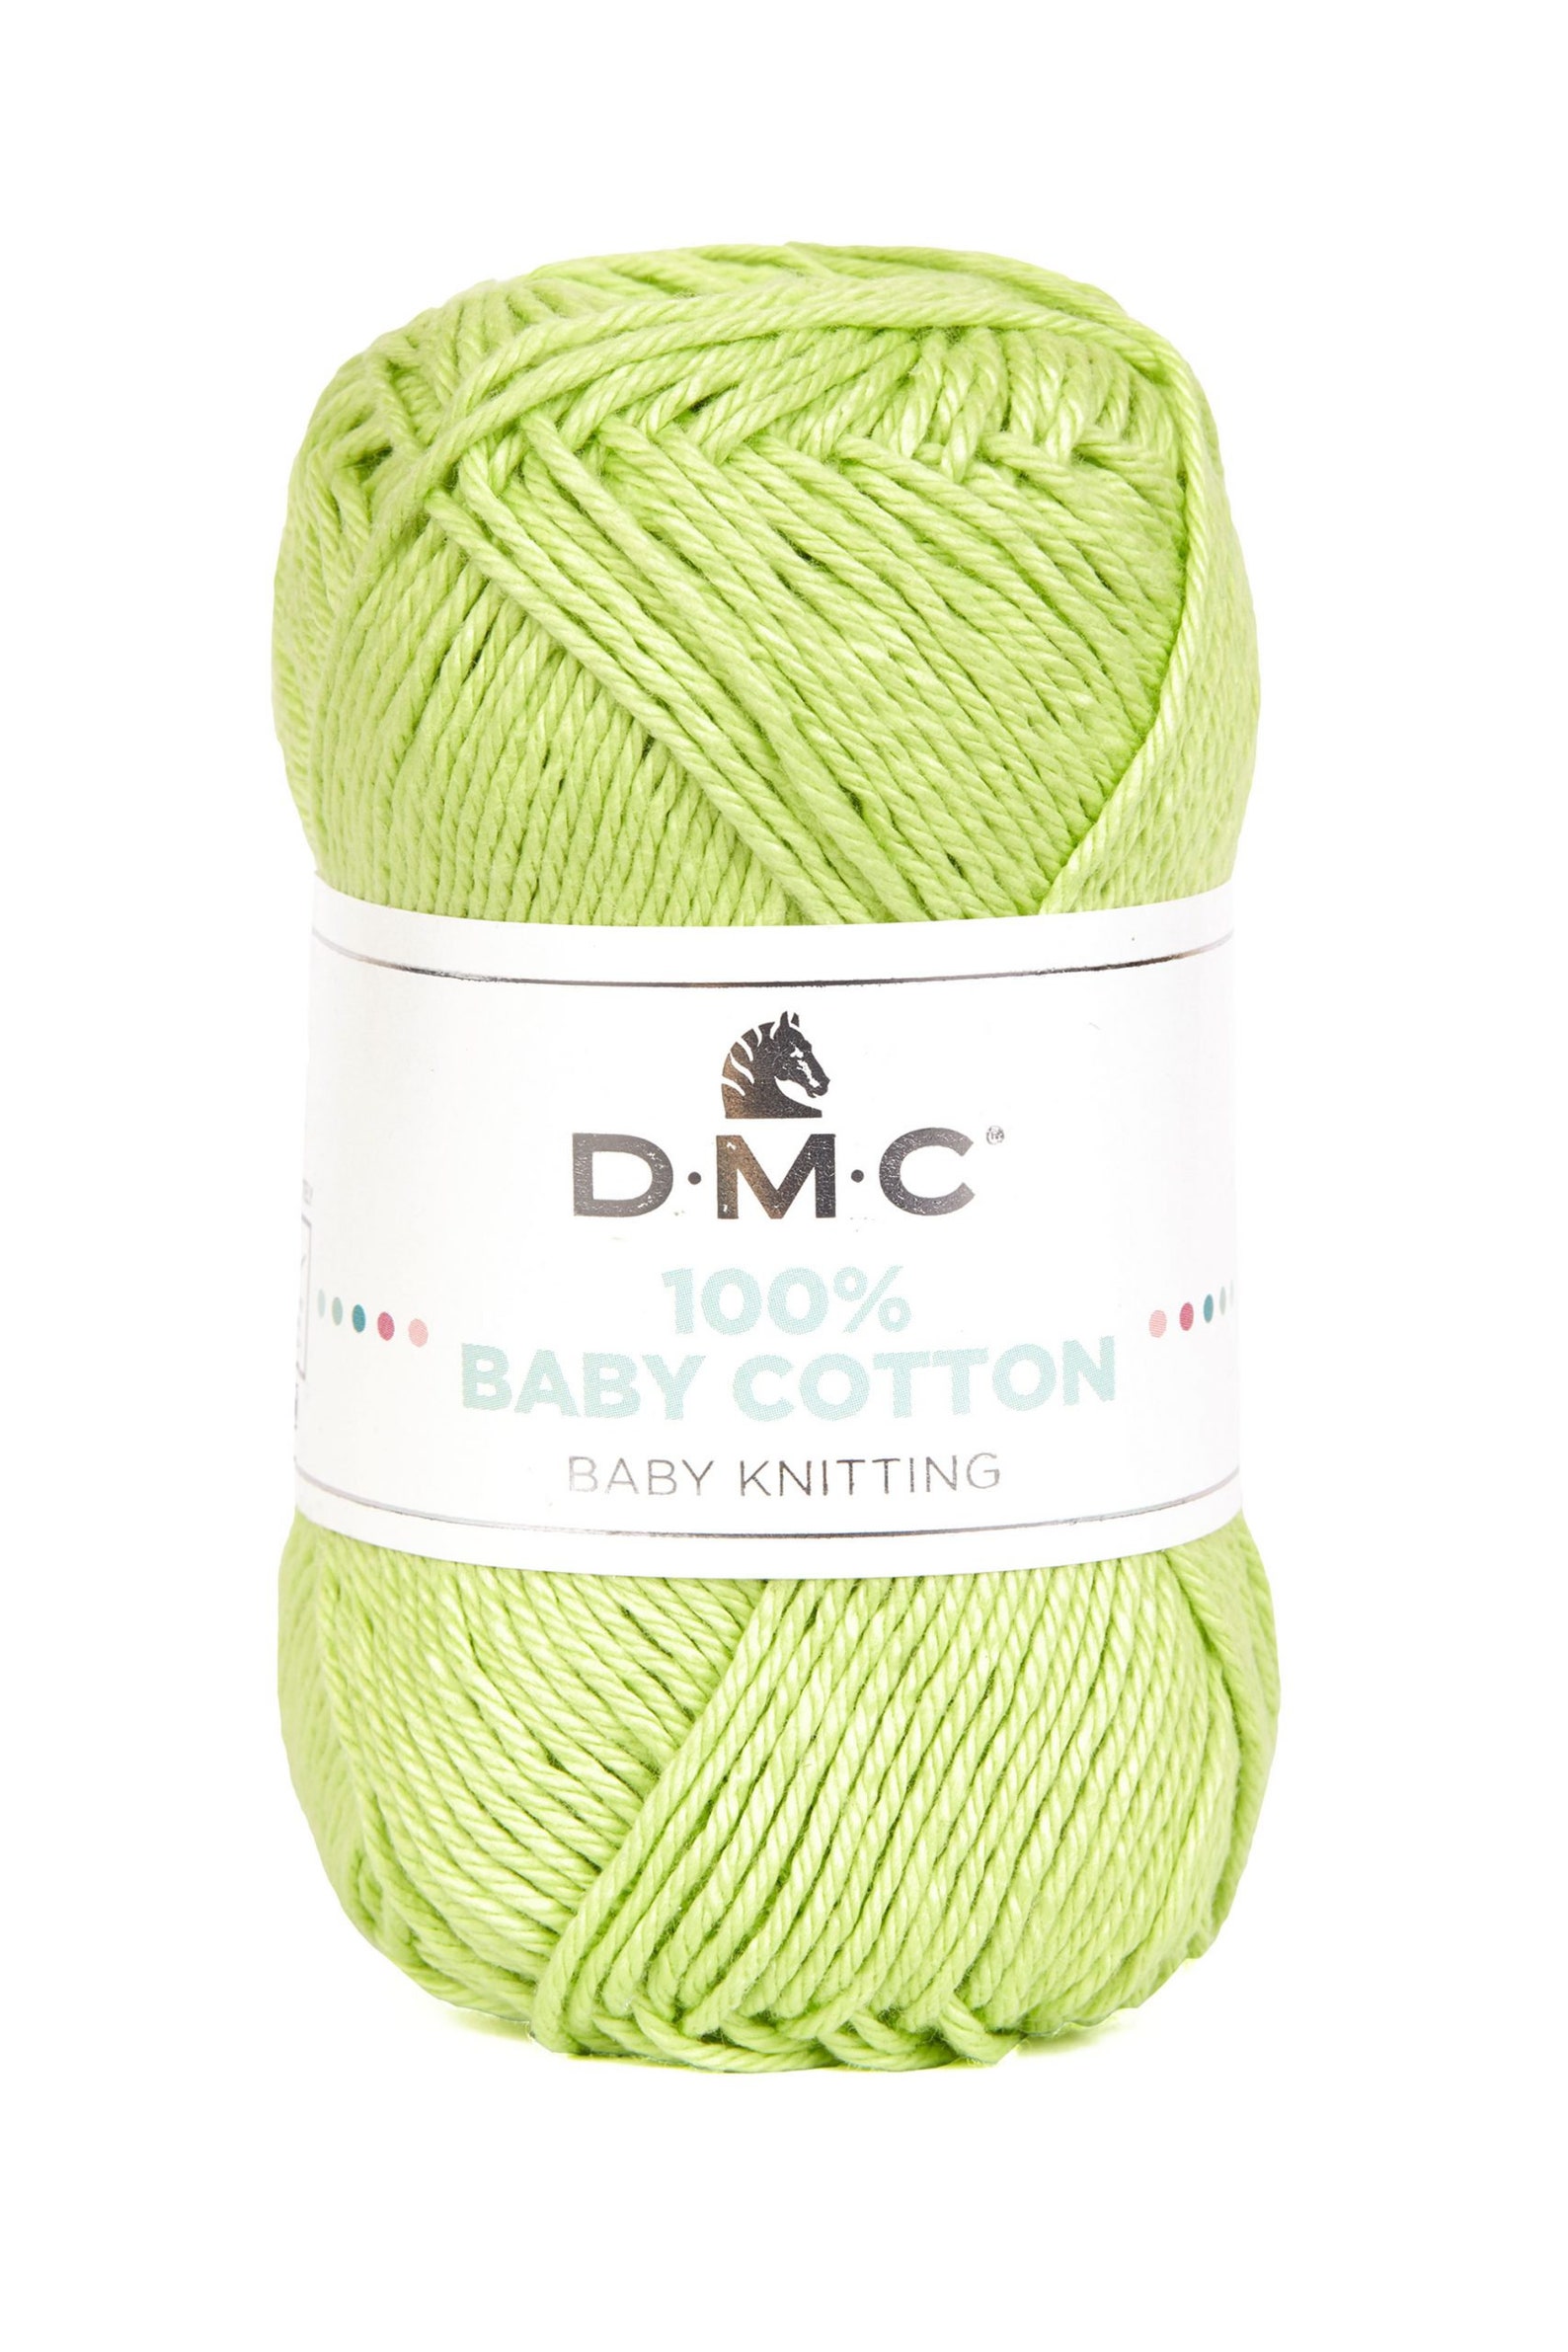 Dmc 100% Baby Cotton Yarn Soft DK 8ply for Knitting and - Etsy